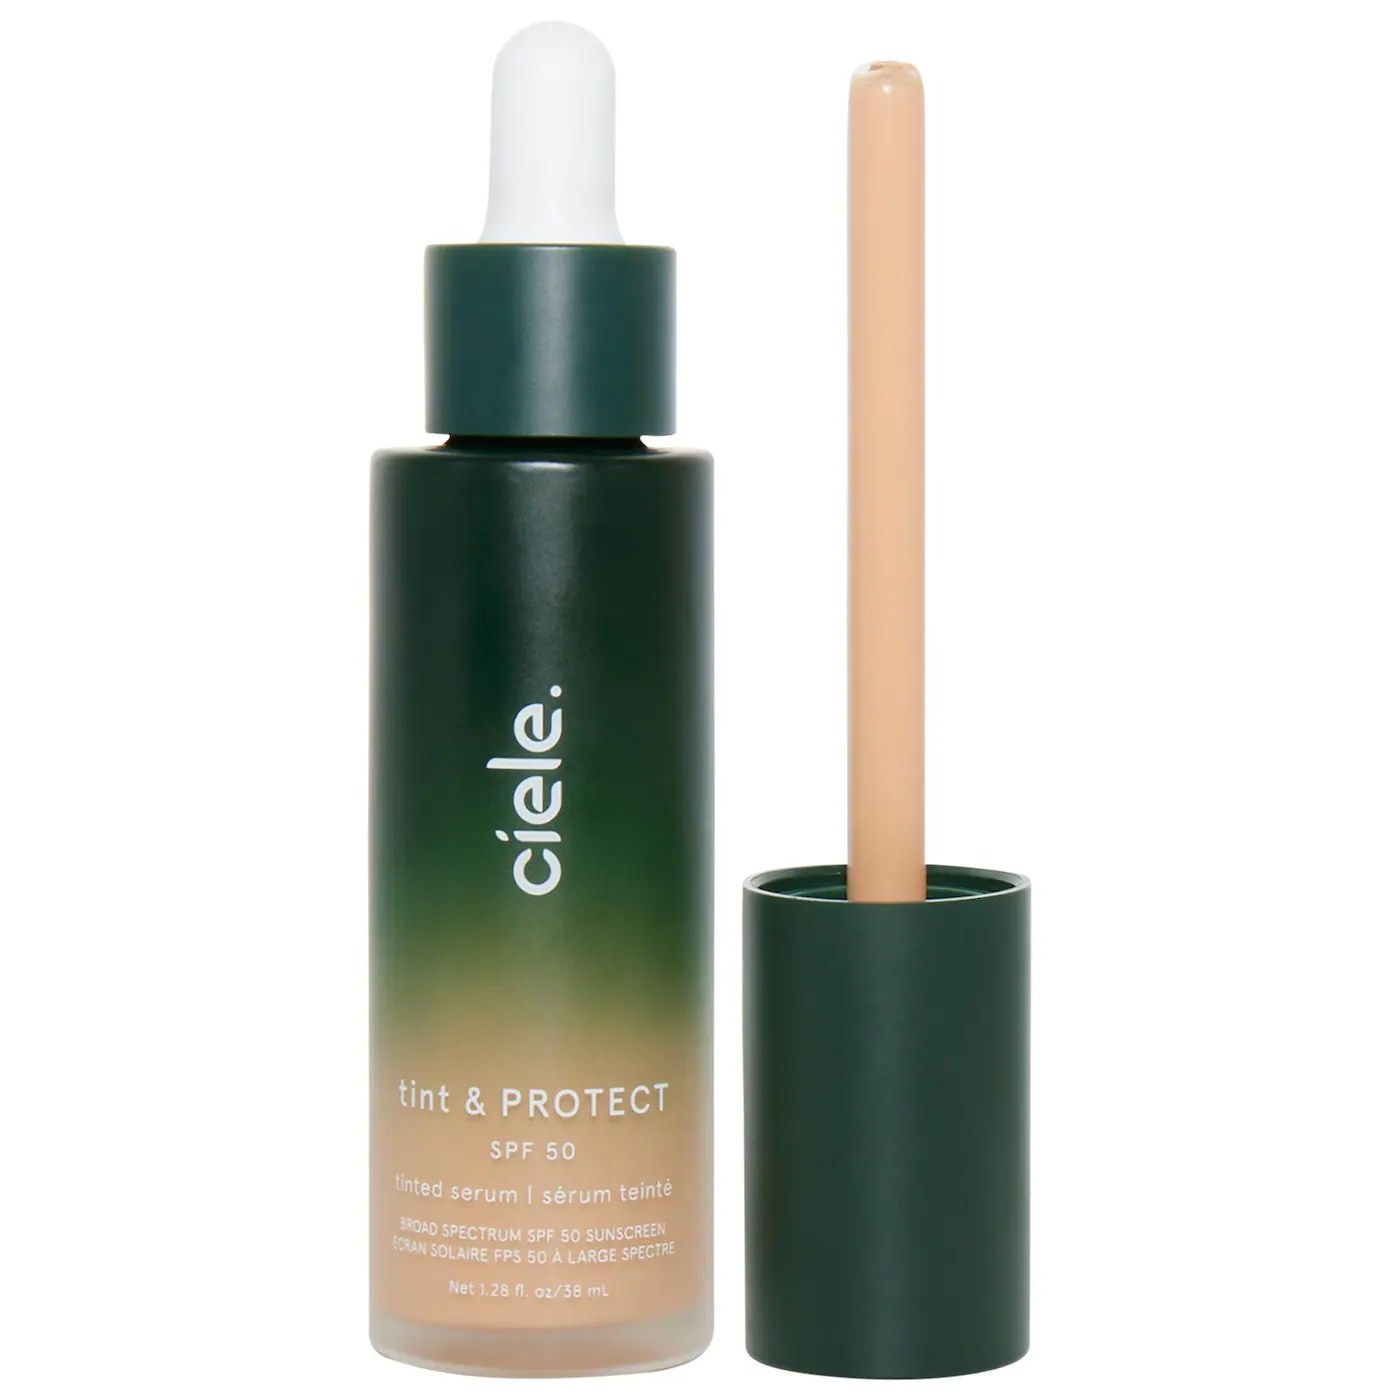 ciele tint and protect spf 50, one of the best foundations for acne-prone skin